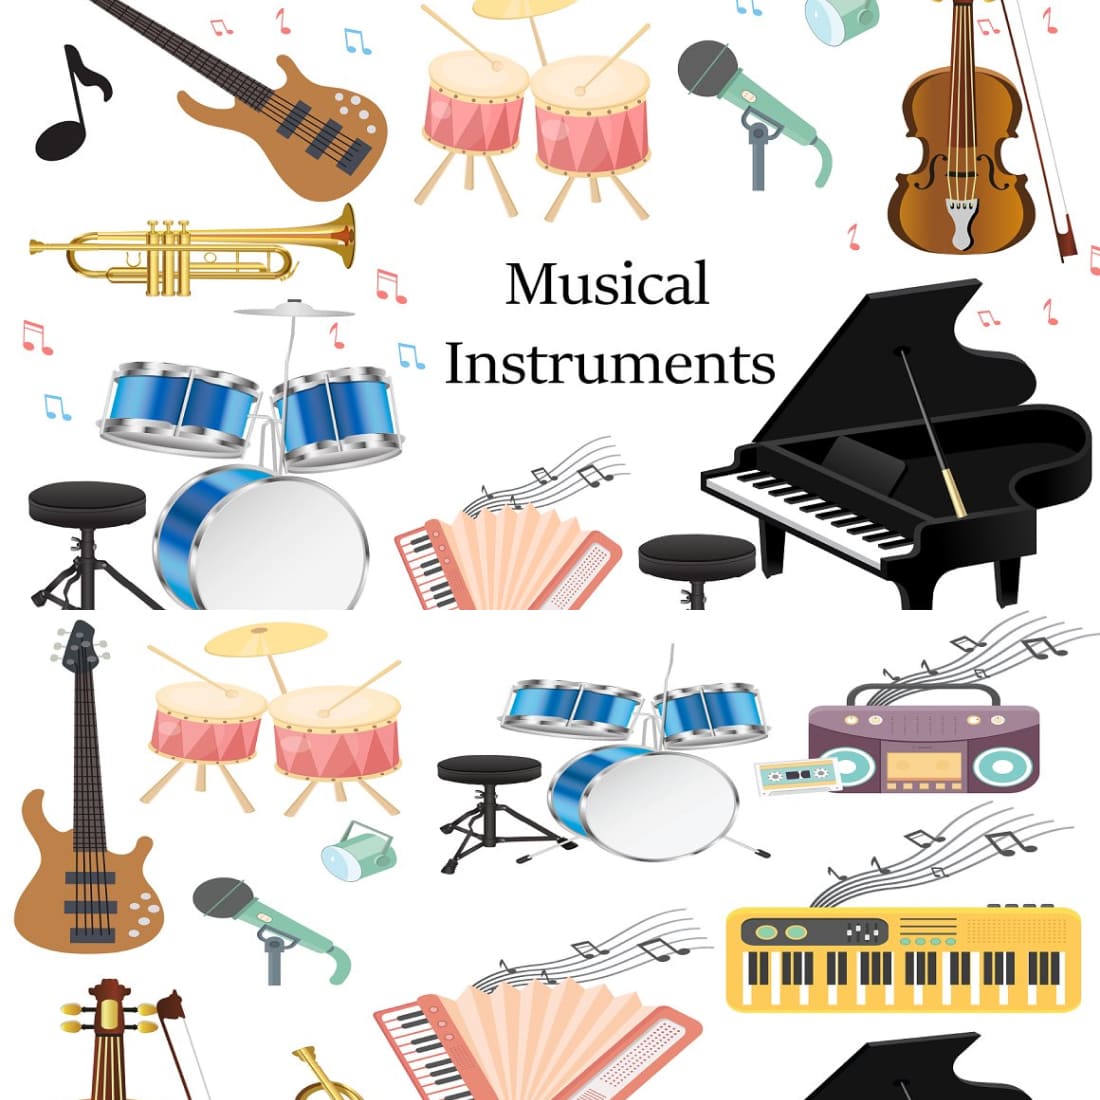 A Pack of Exquisite Images of Musical Instruments.